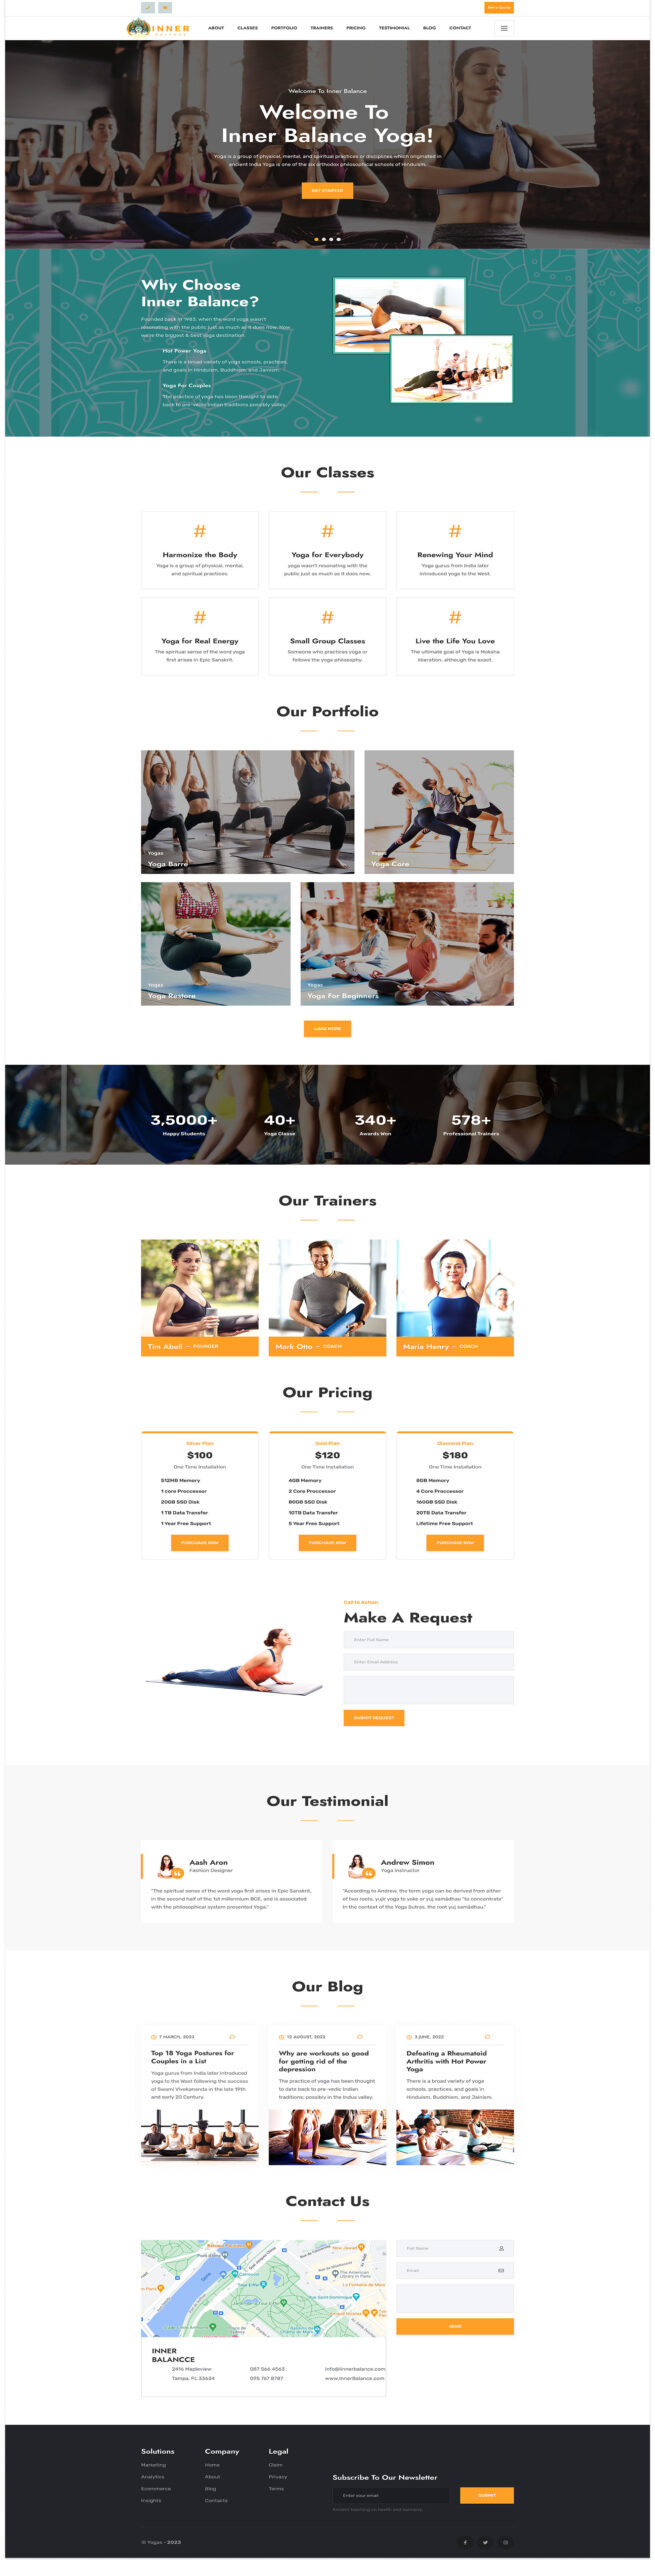 Landing Page of Inner Balance by Aella